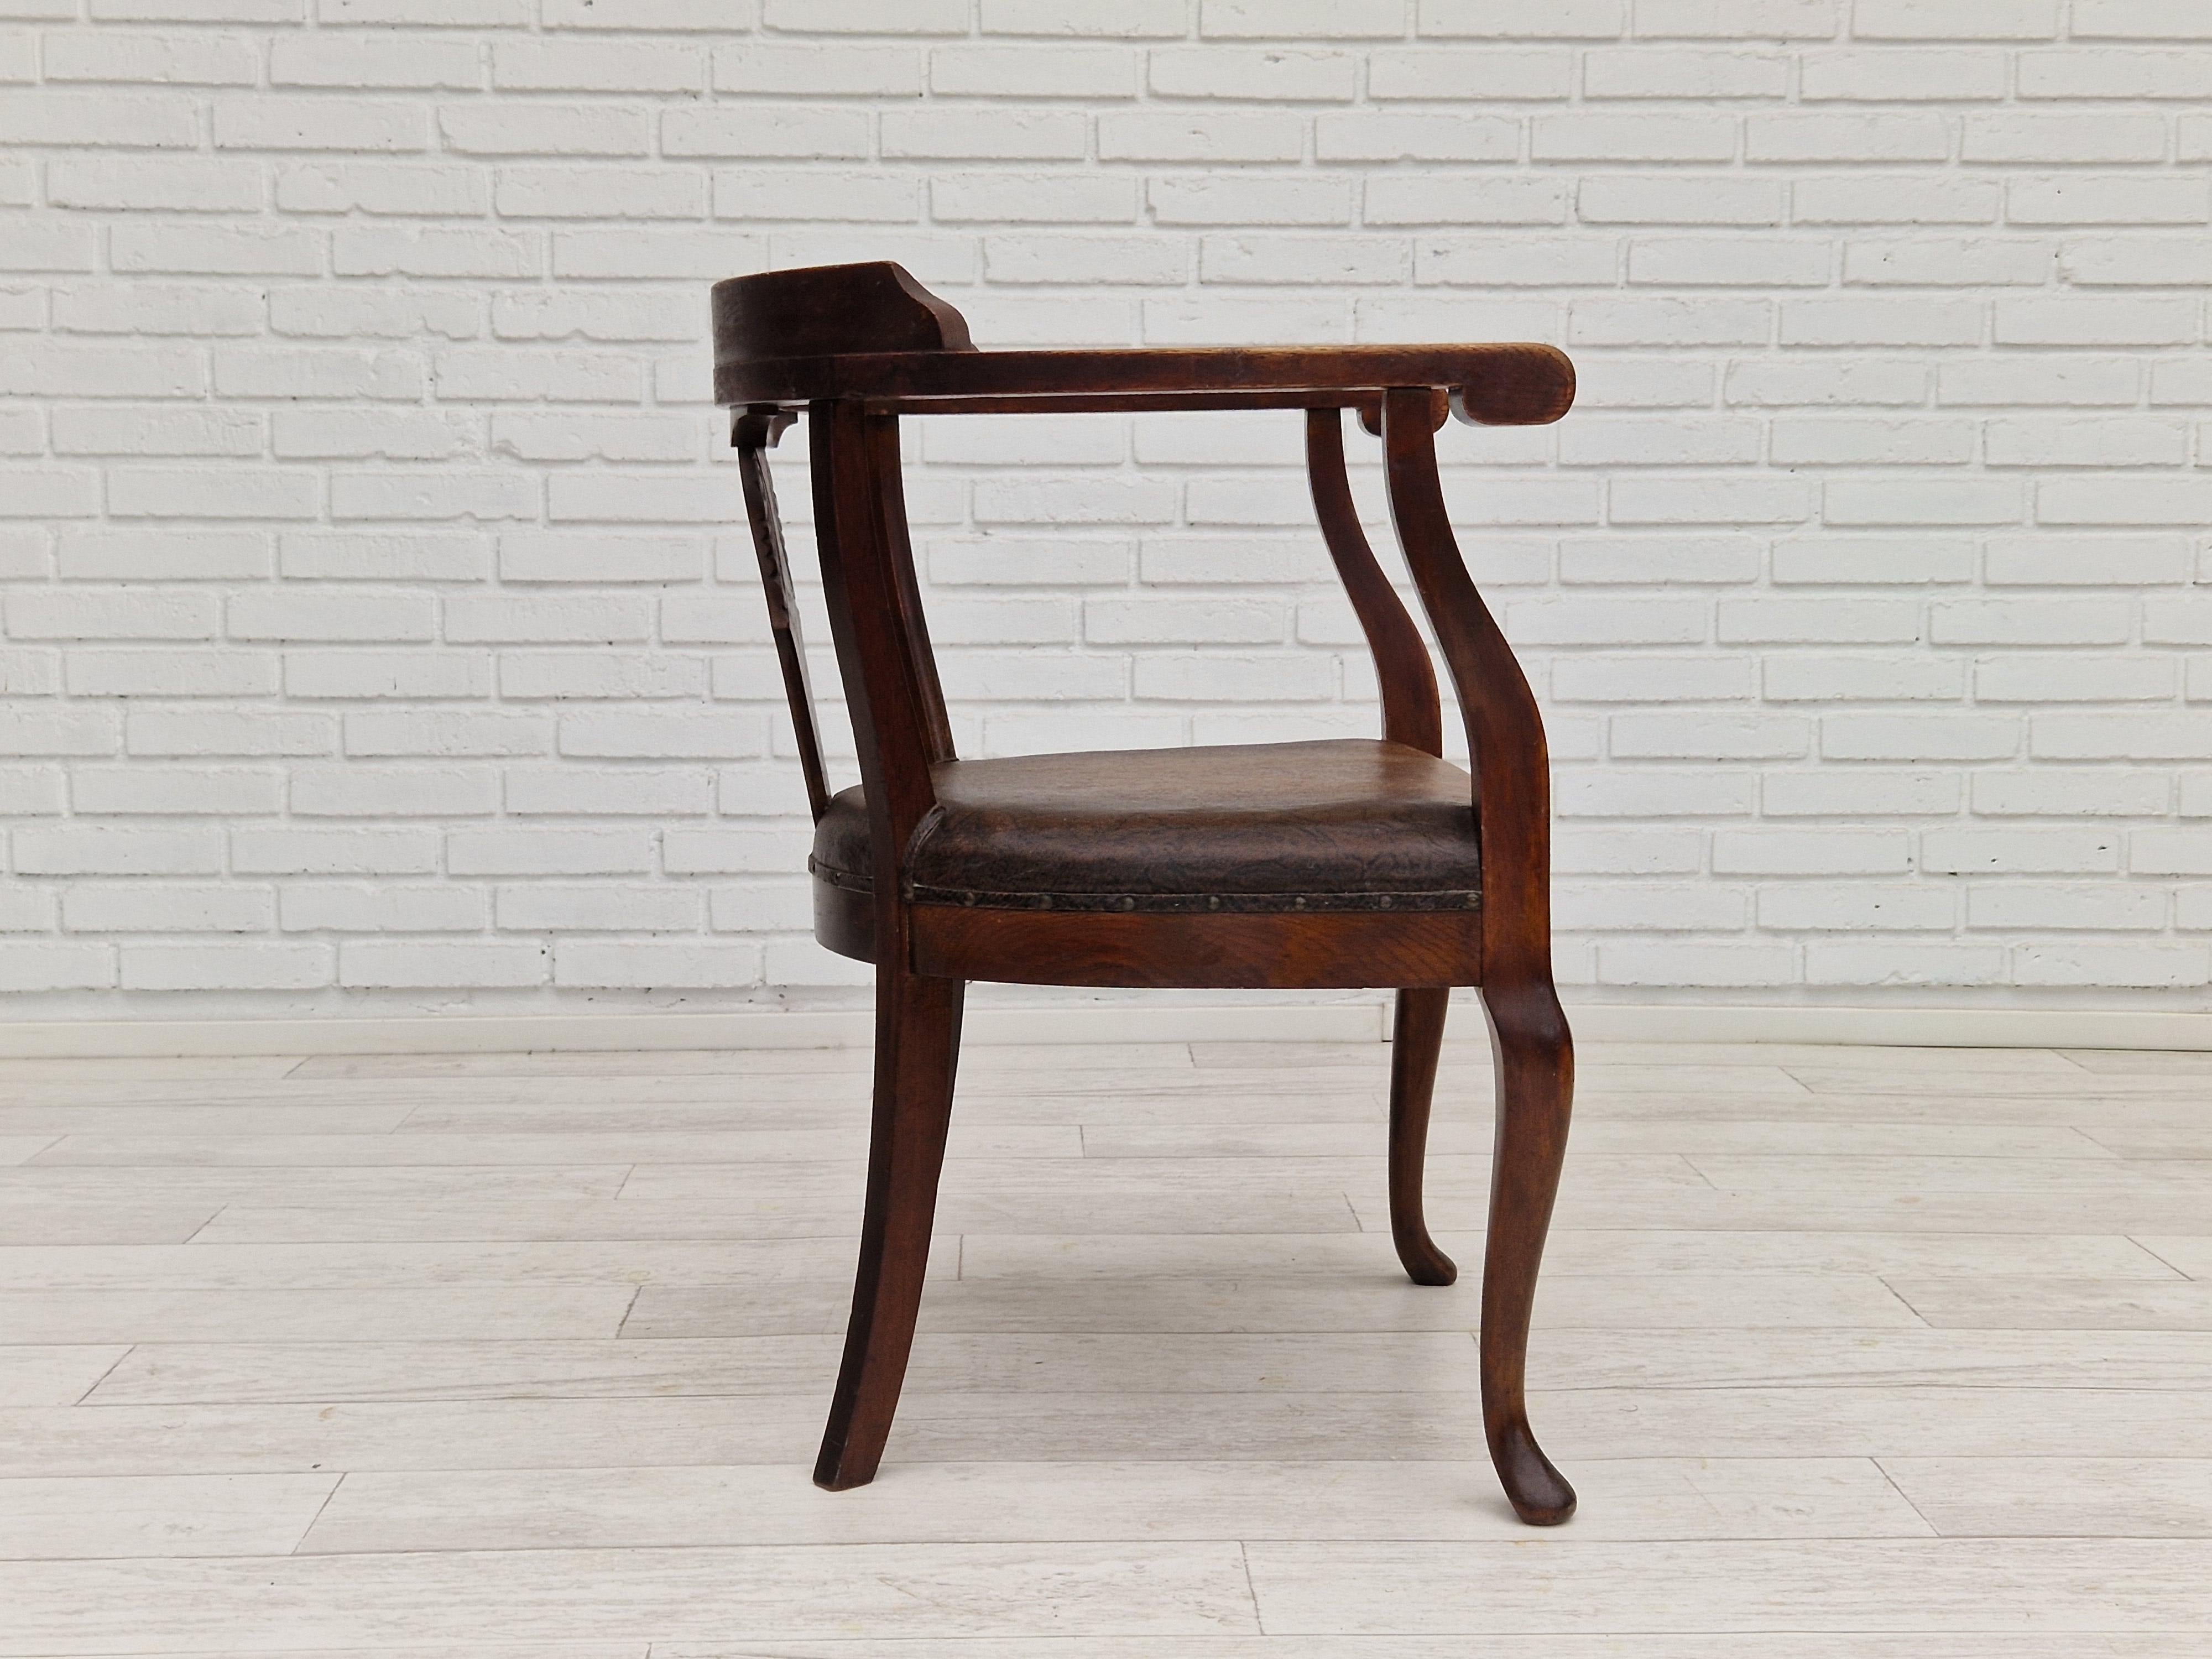 1950s, Scandinavian Vintage Armchair, Original Condition, Leather, Oak Wood In Good Condition For Sale In Tarm, 82